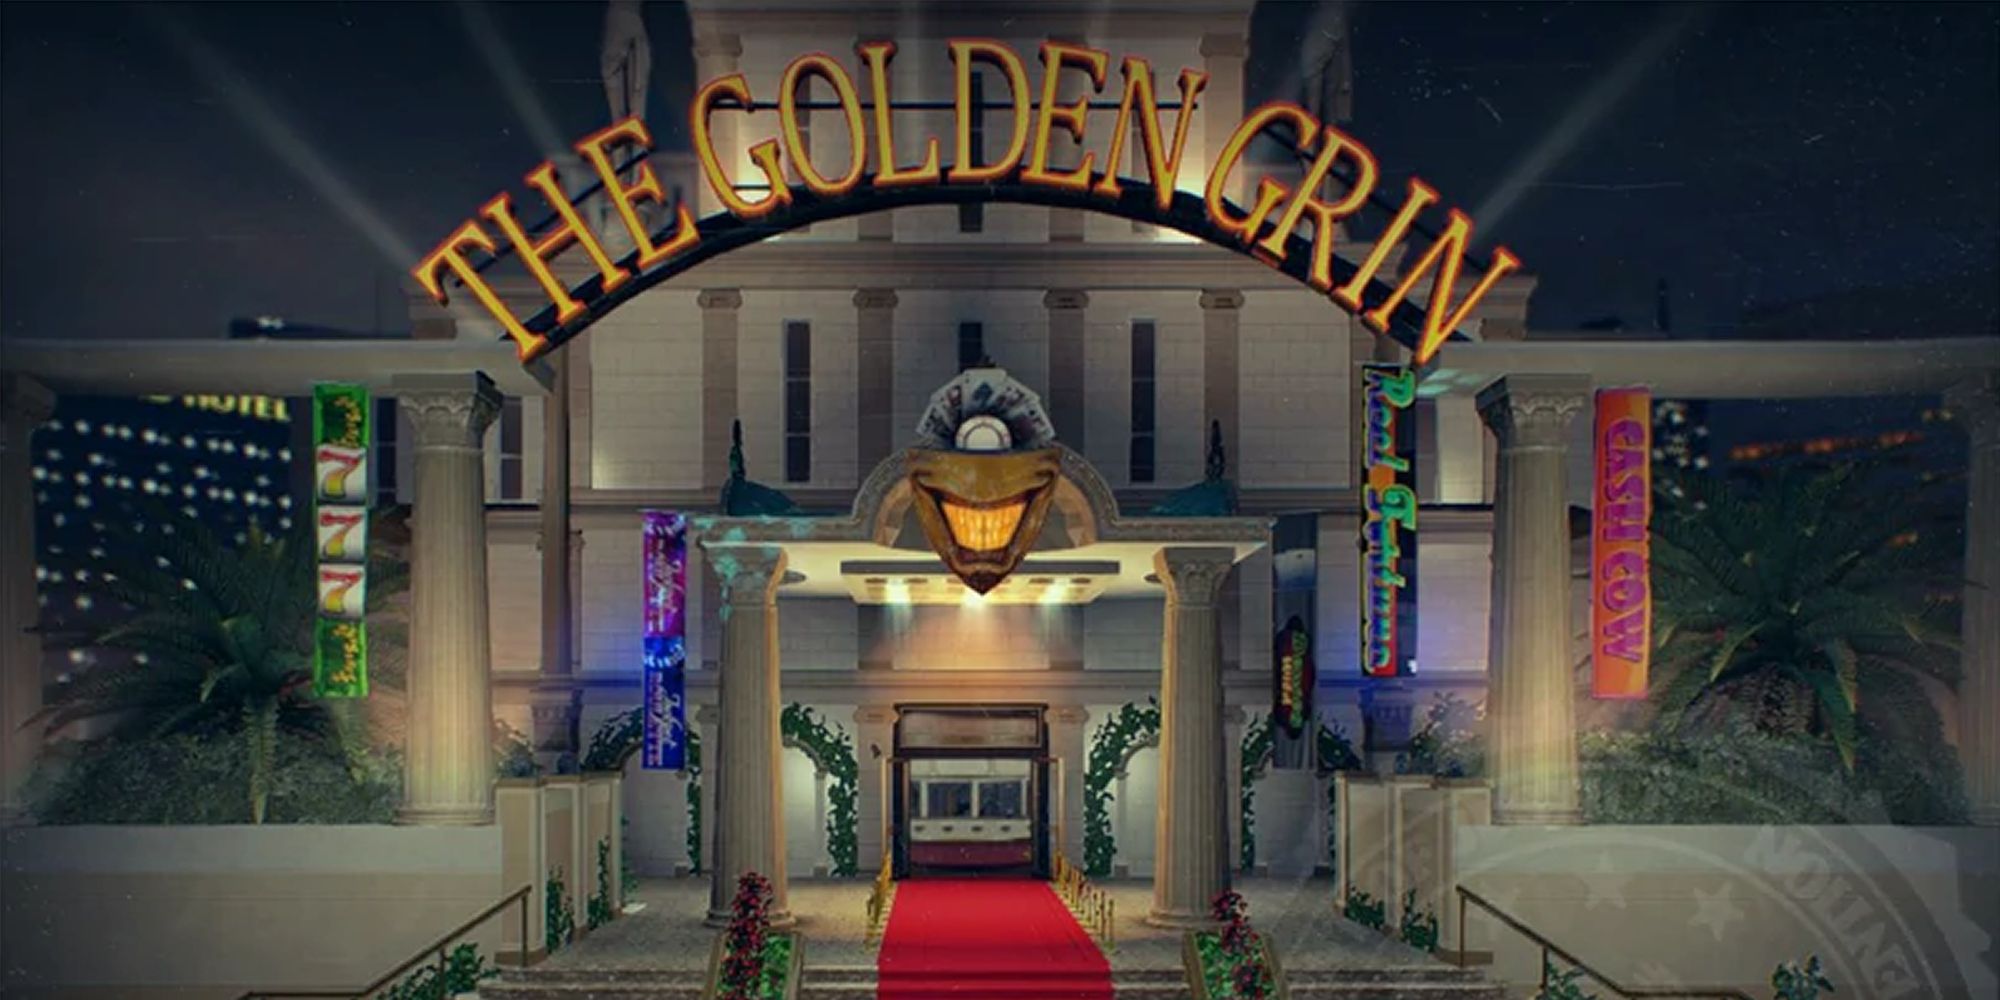 The Smiling Entrance To The Golden Grin Casino